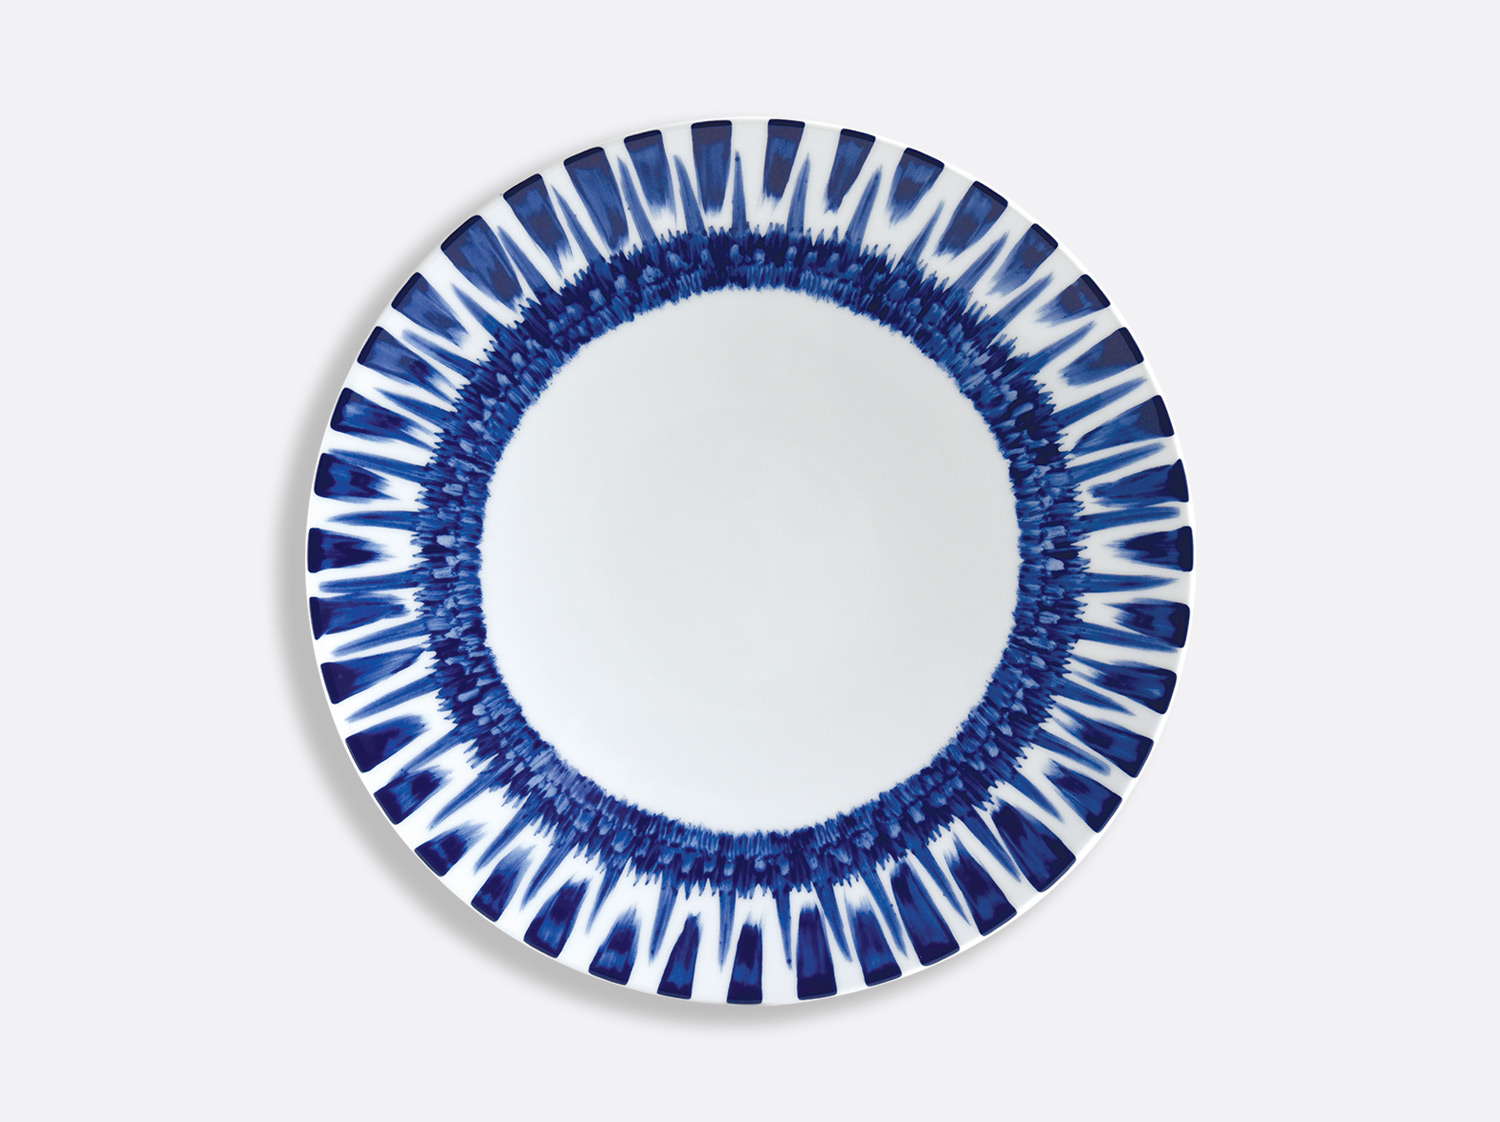 China Coupe dinner plate 27 cm of the collection IN BLOOM - Zemer Peled | Bernardaud